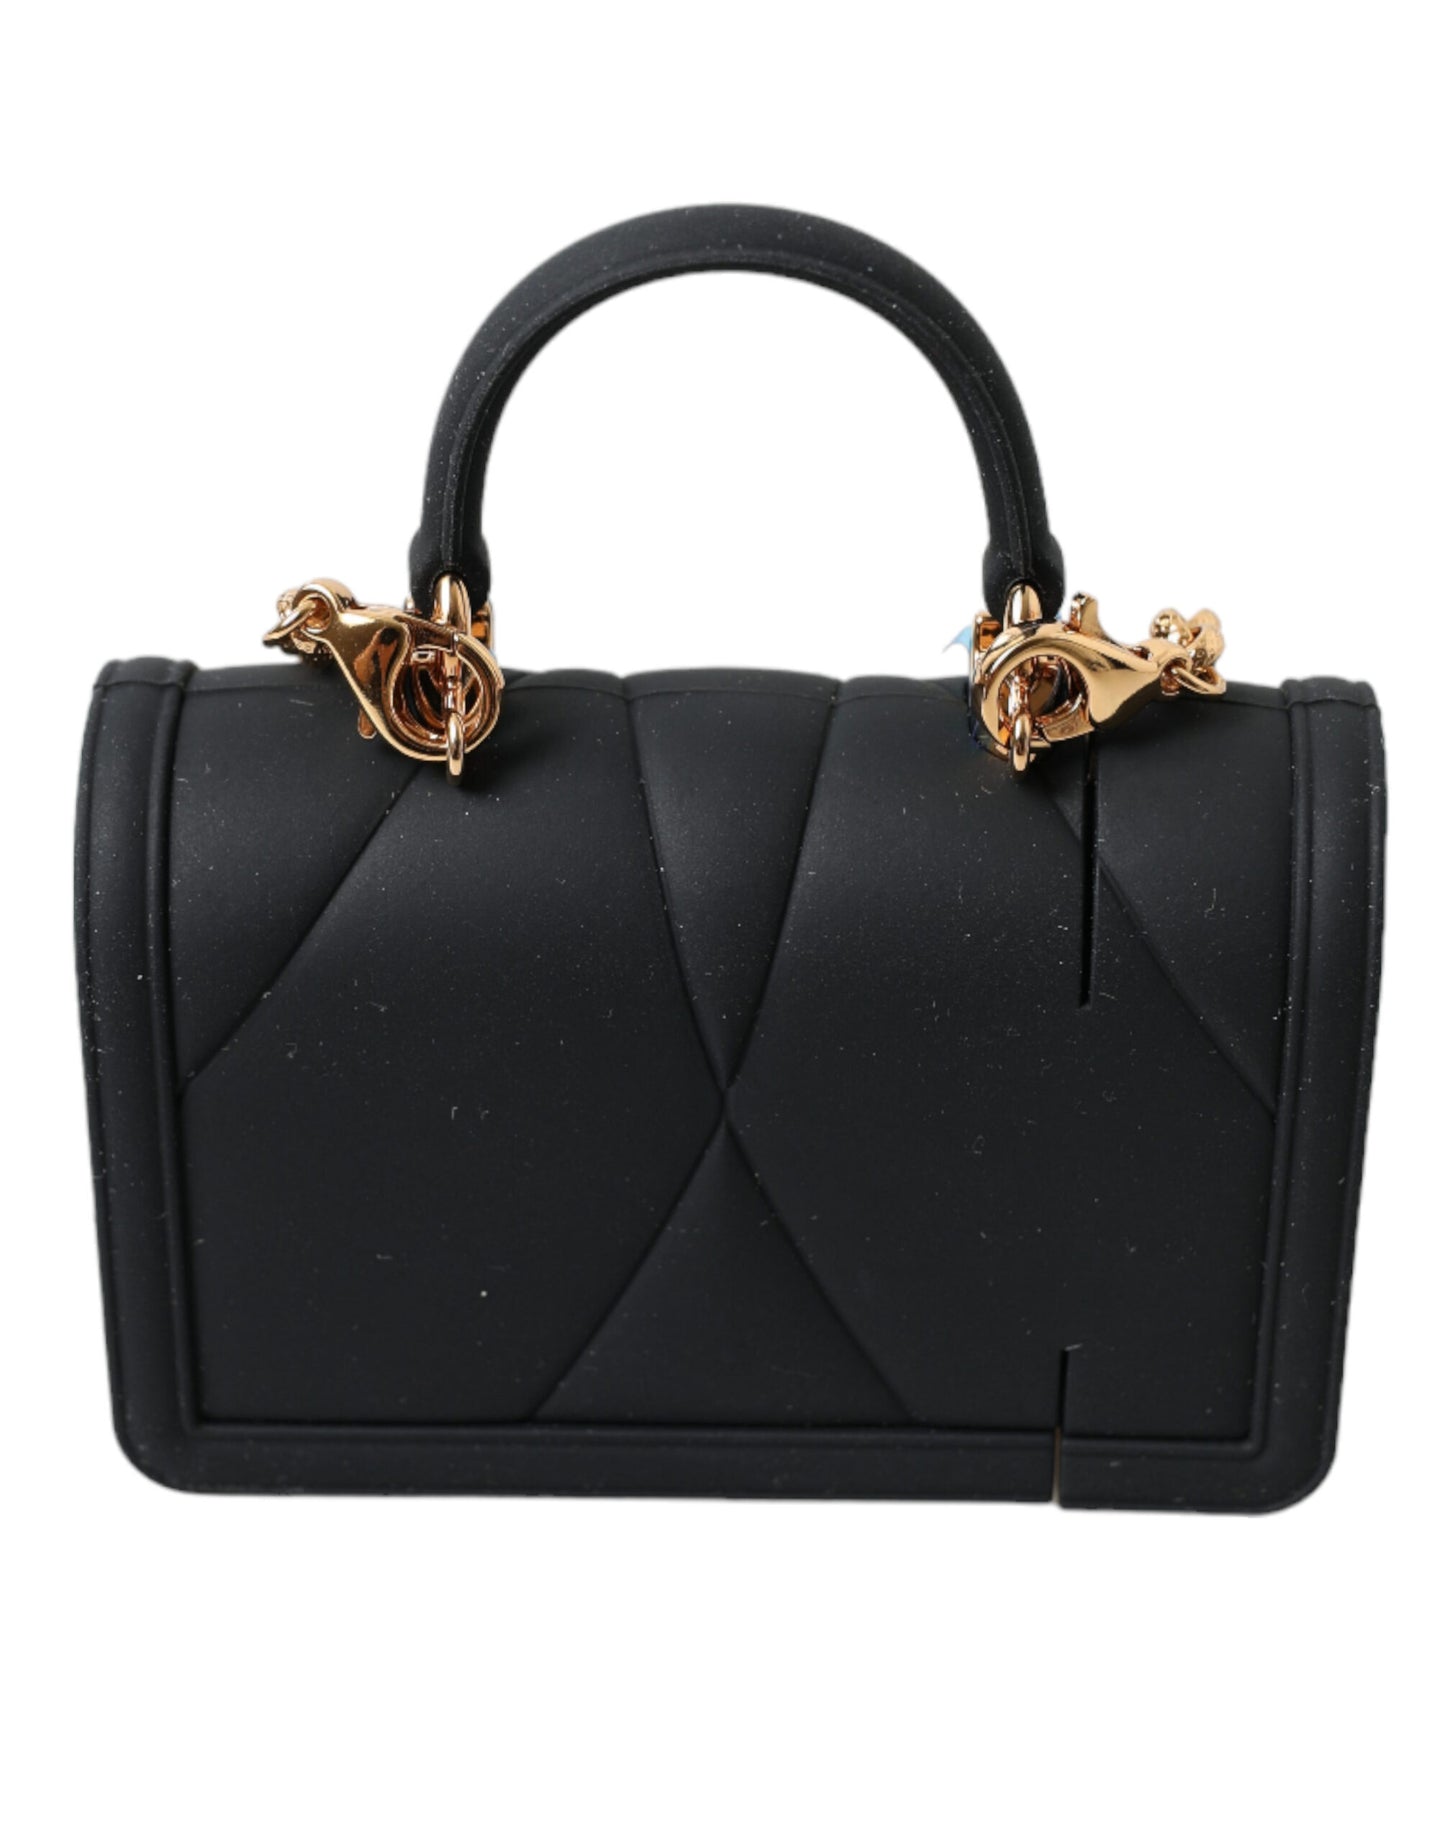 Dolce & Gabbana Exquisite Quilted AirPods Case with Chain Strap